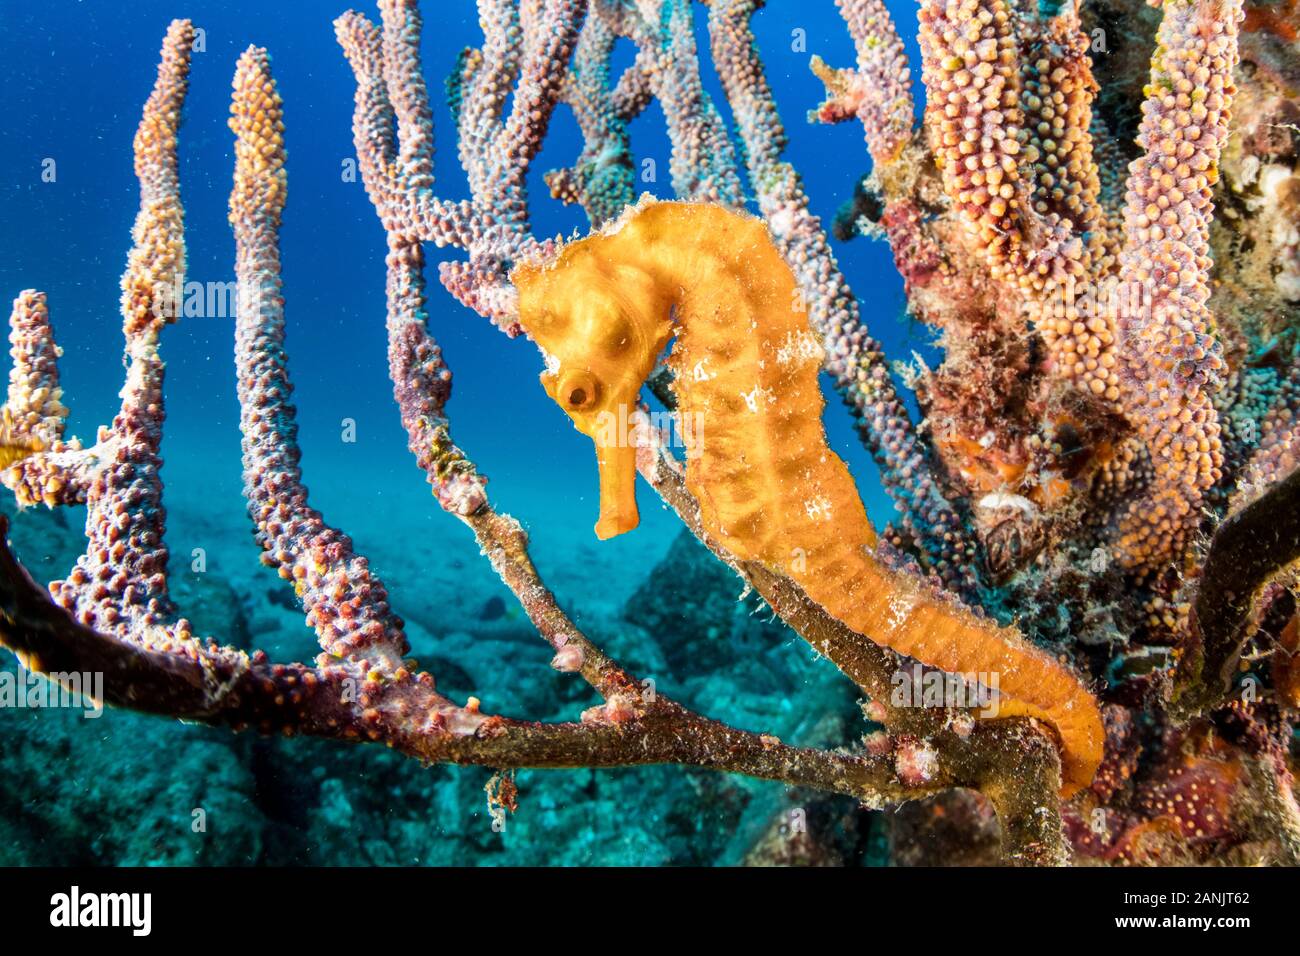 Pacific seahorse, Hippocampus ingens, among gorgonian coral on Salvatierra Wreck -a cargo ferry 'La Salvatierra' which sank in 1976 moments after stri Stock Photo